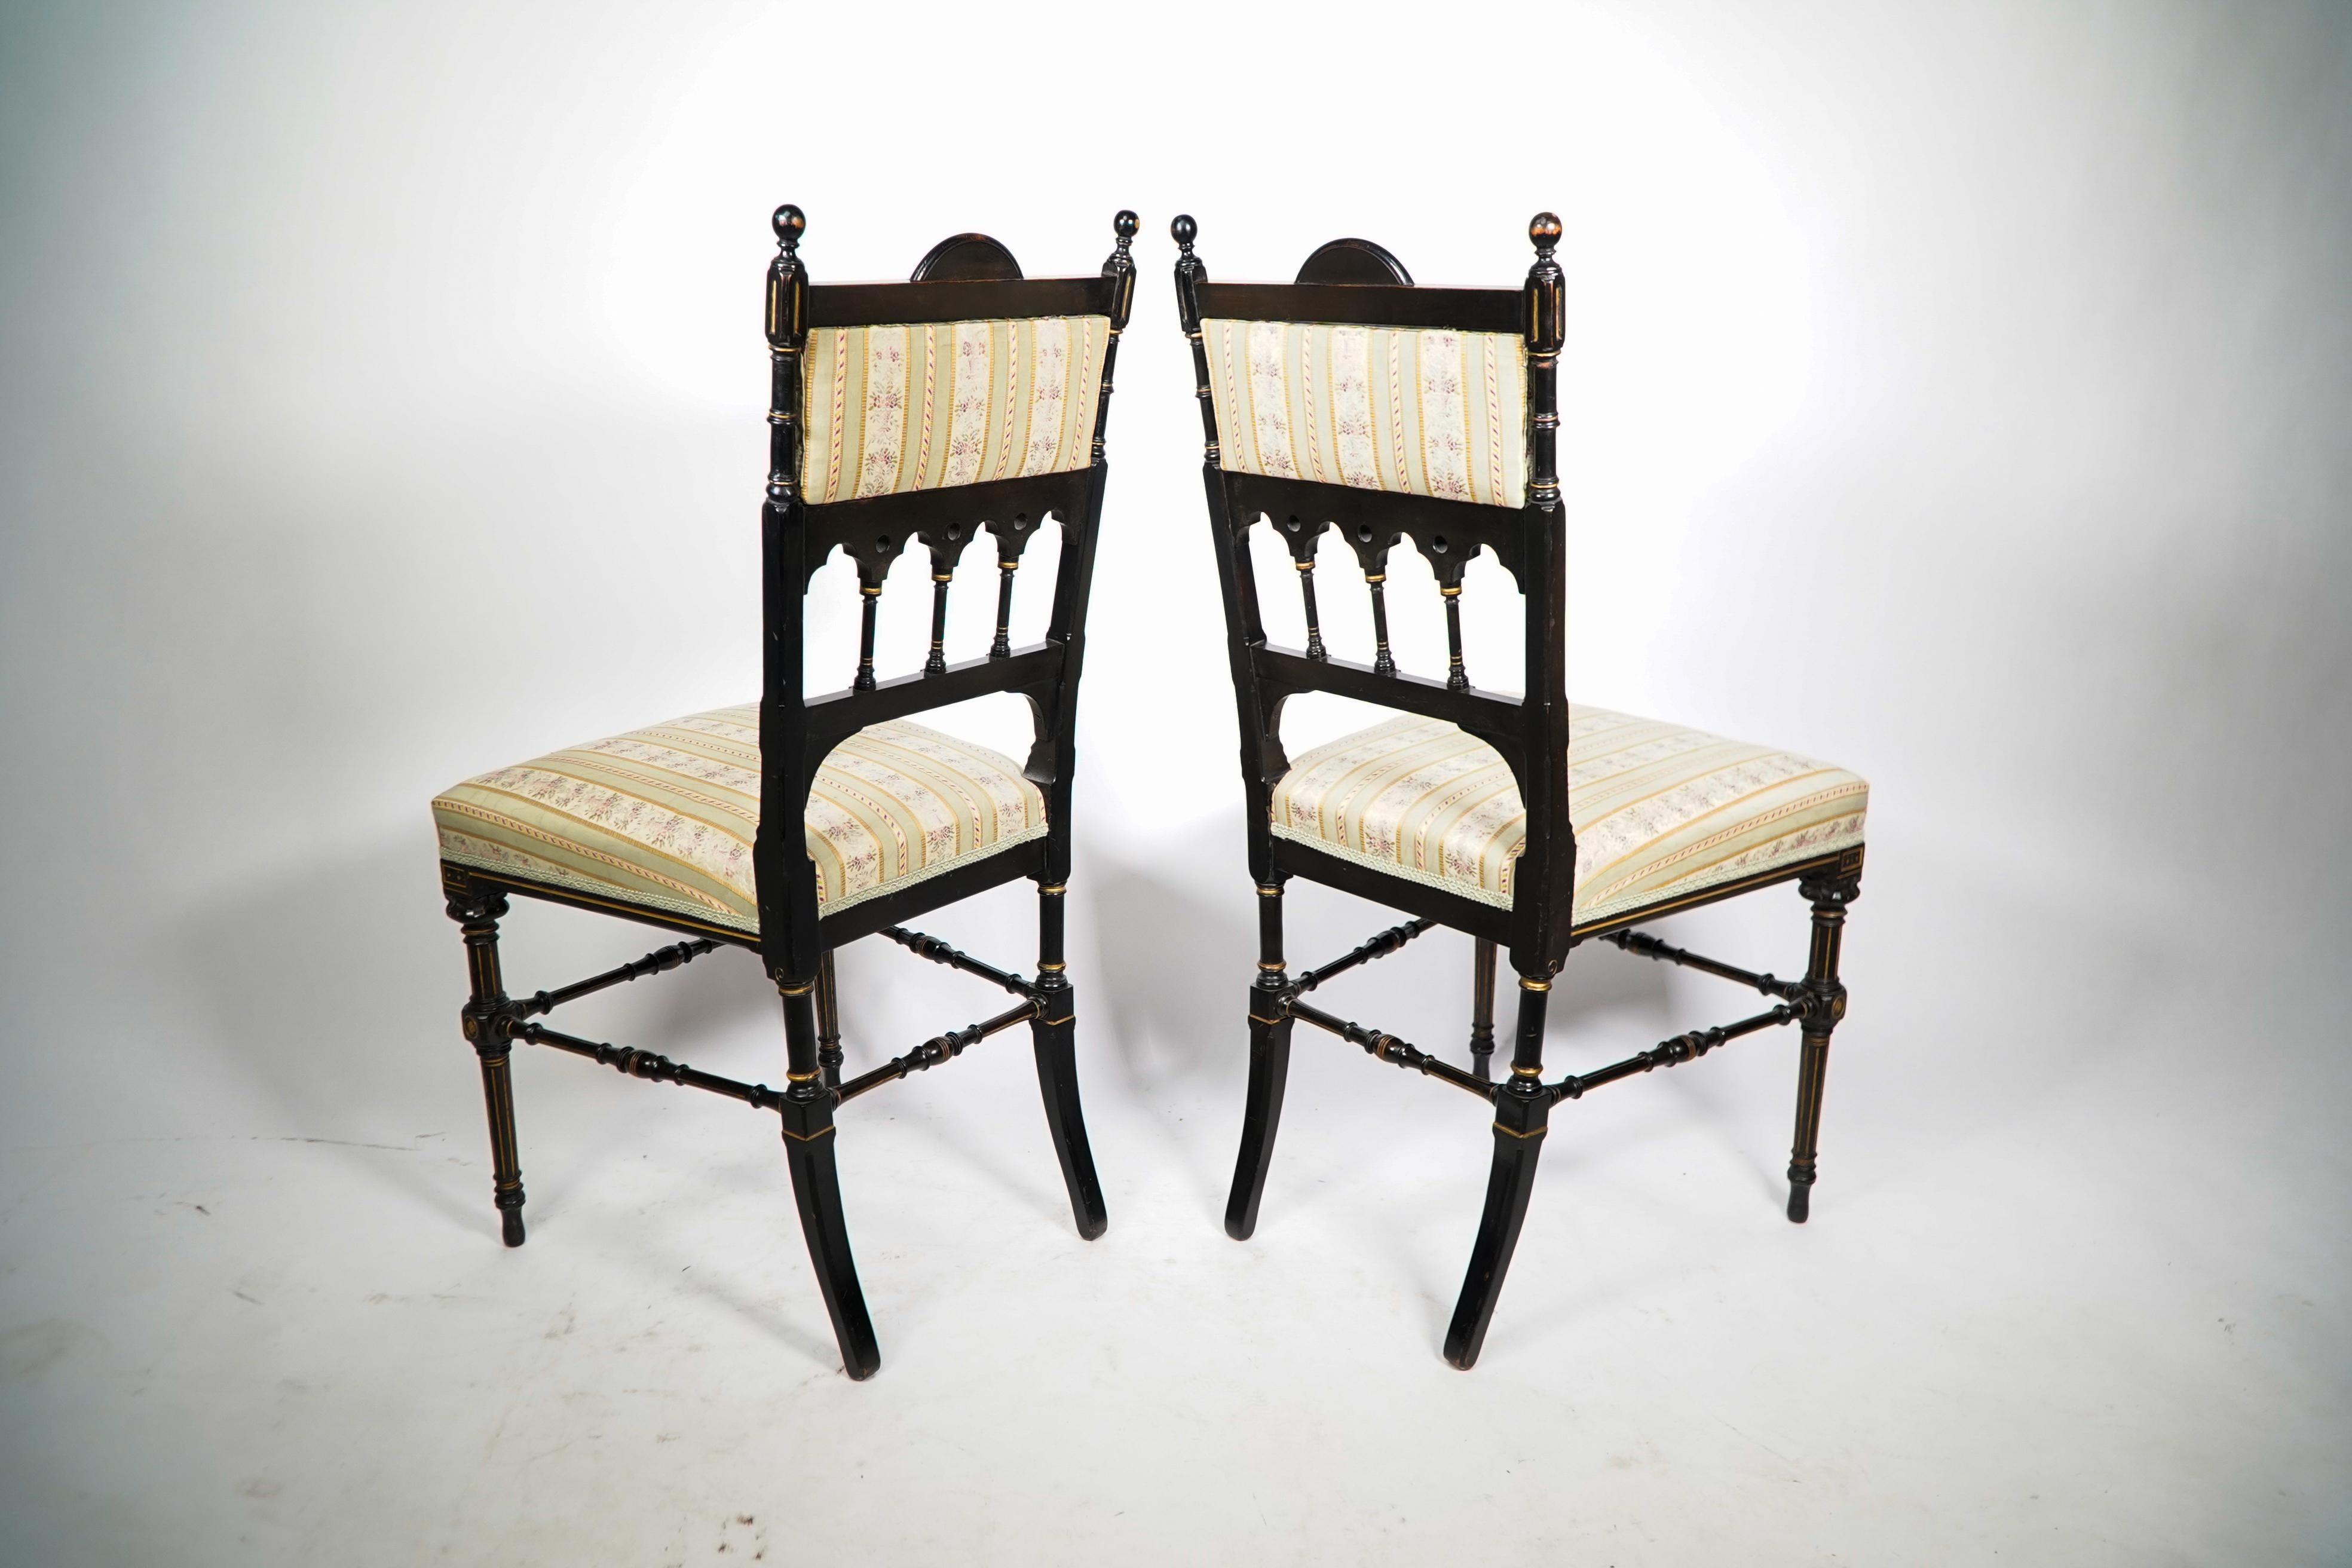 Whytock & Reid. A pair of Aesthetic Movement ebonized & parcel gilt side chairs. For Sale 12